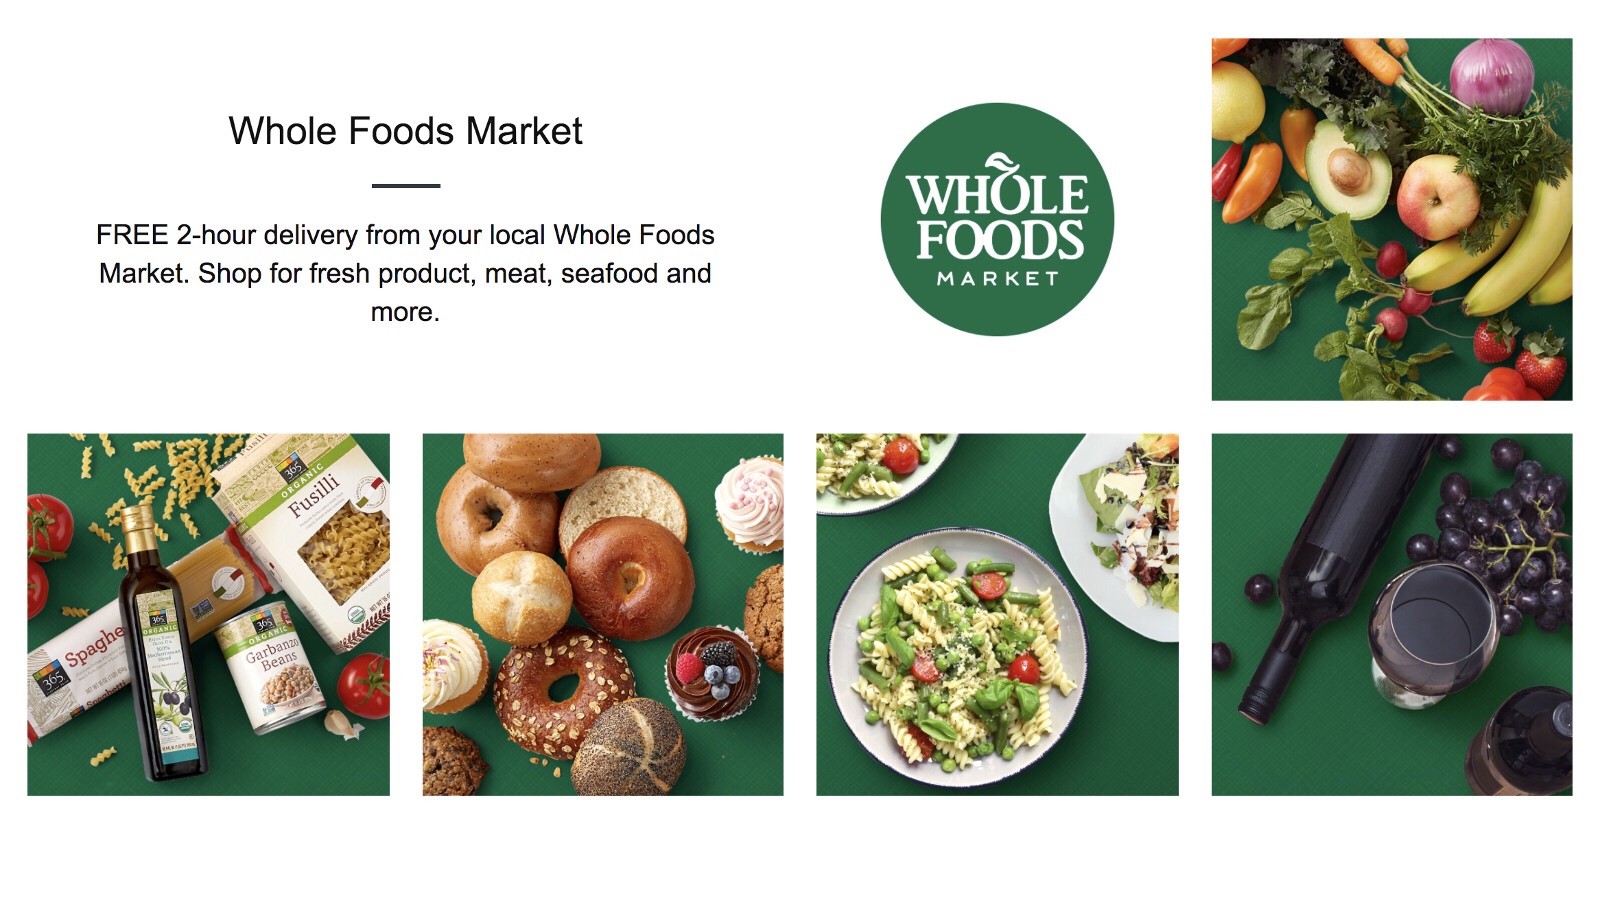 Amazon will now deliver Whole Foods products right at your doorstep in two hours